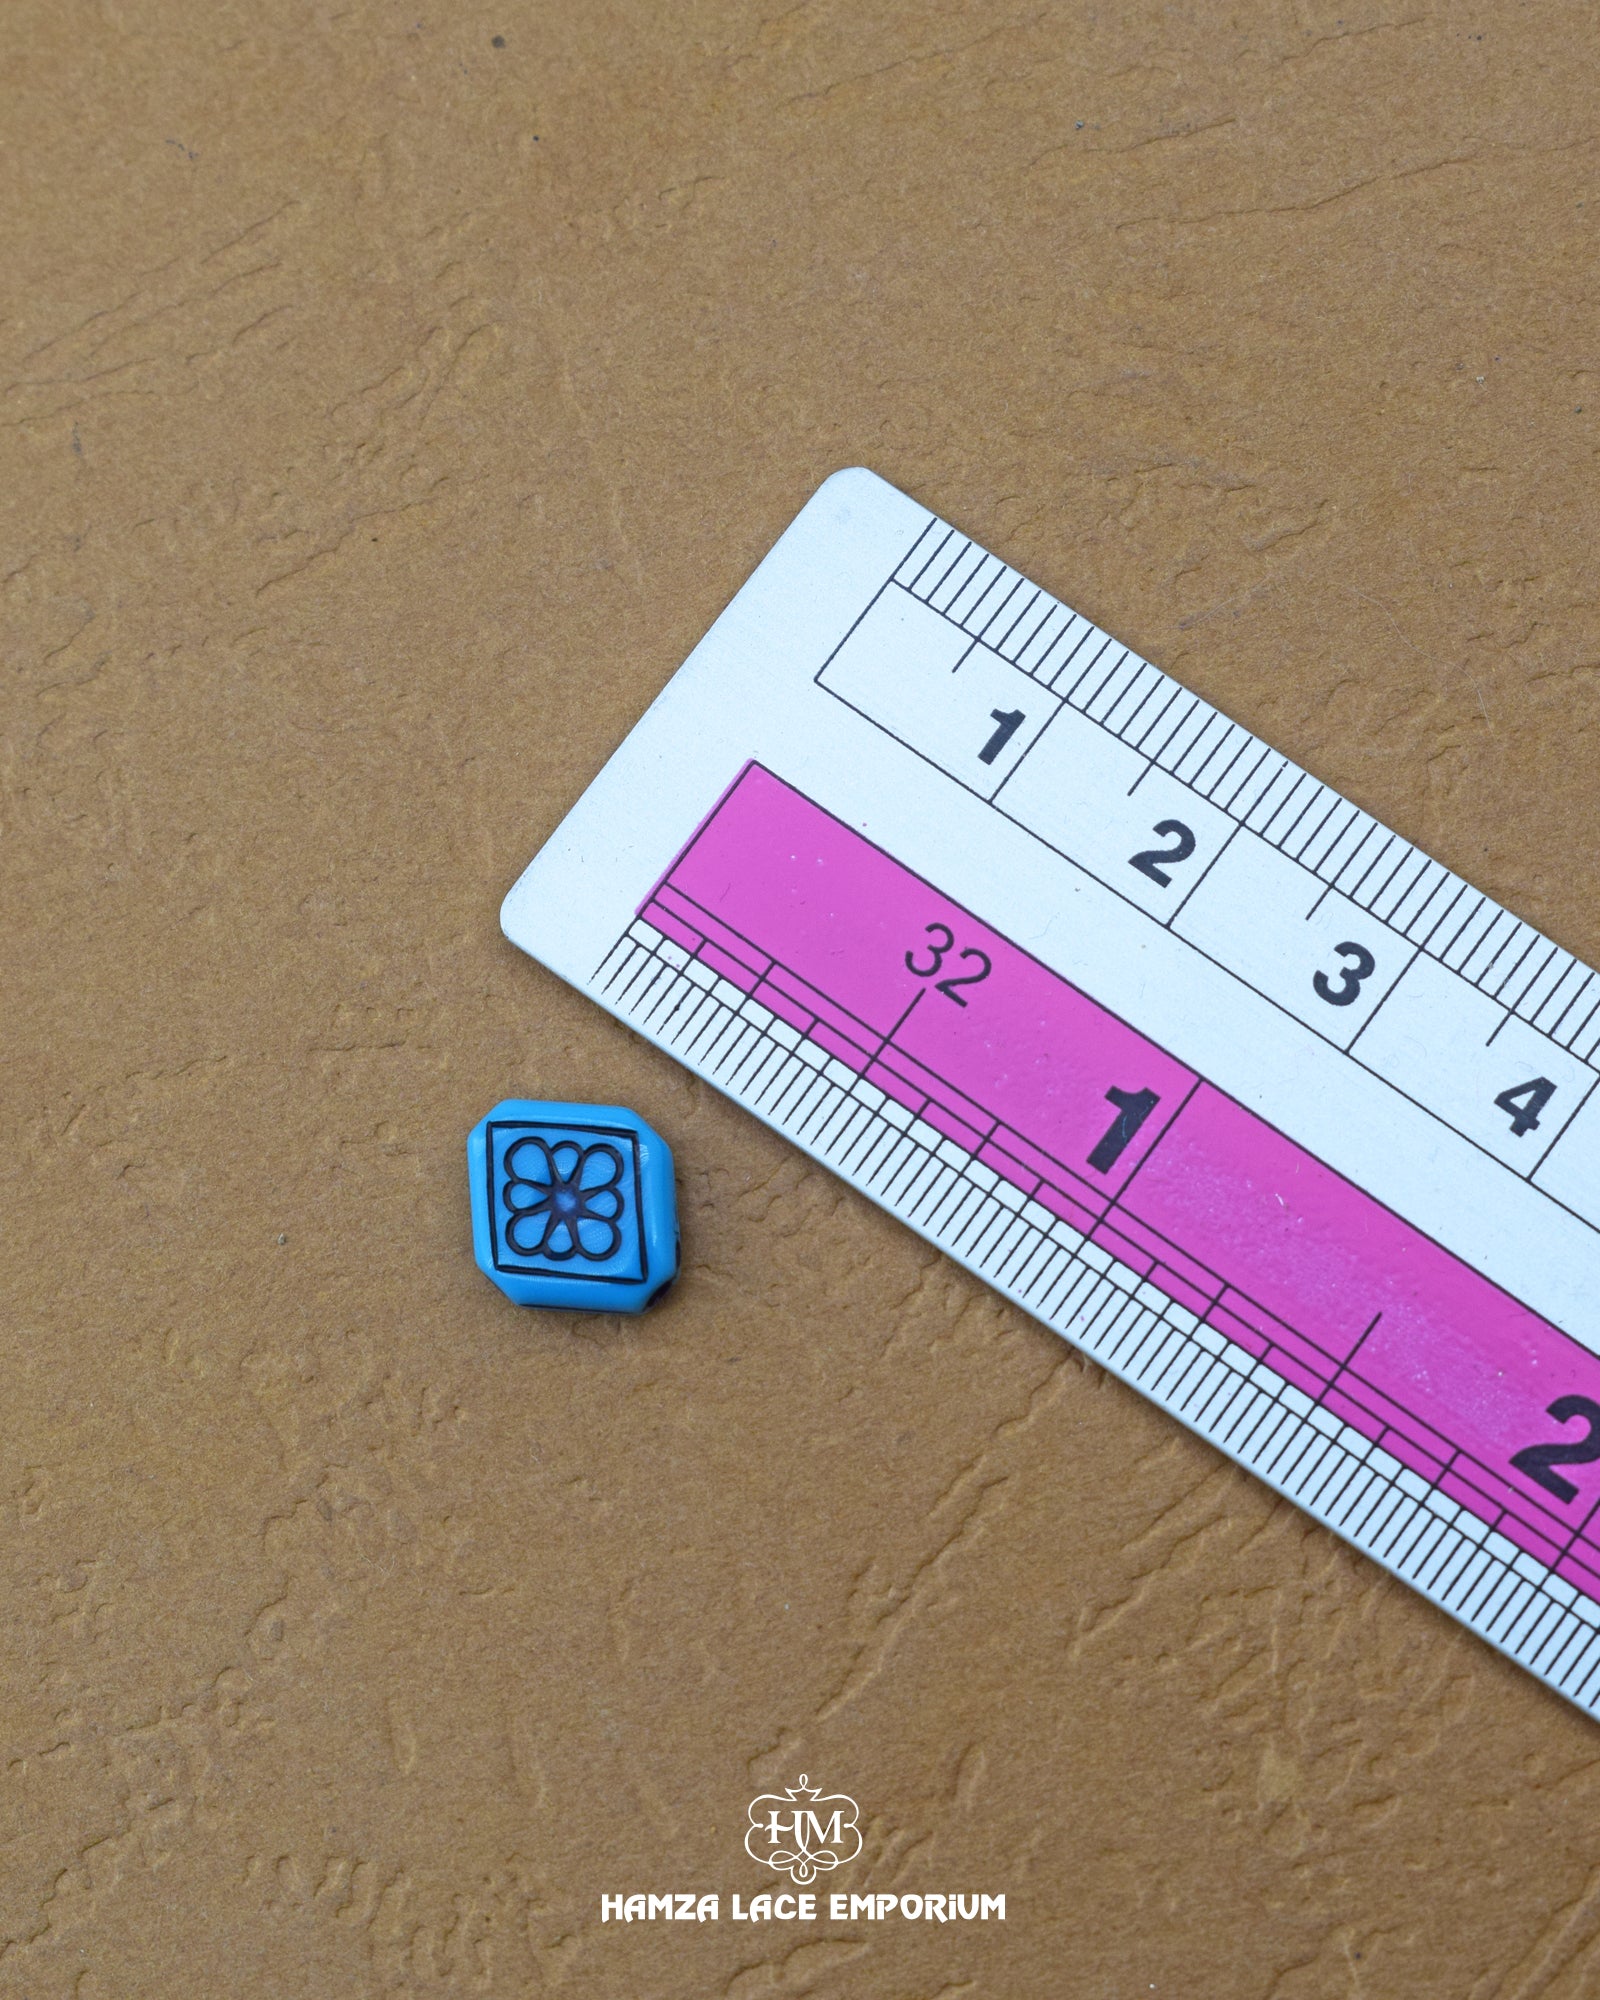 The size of the Beautifully designed 'Kite Design Button MA372' is measured by using a ruler